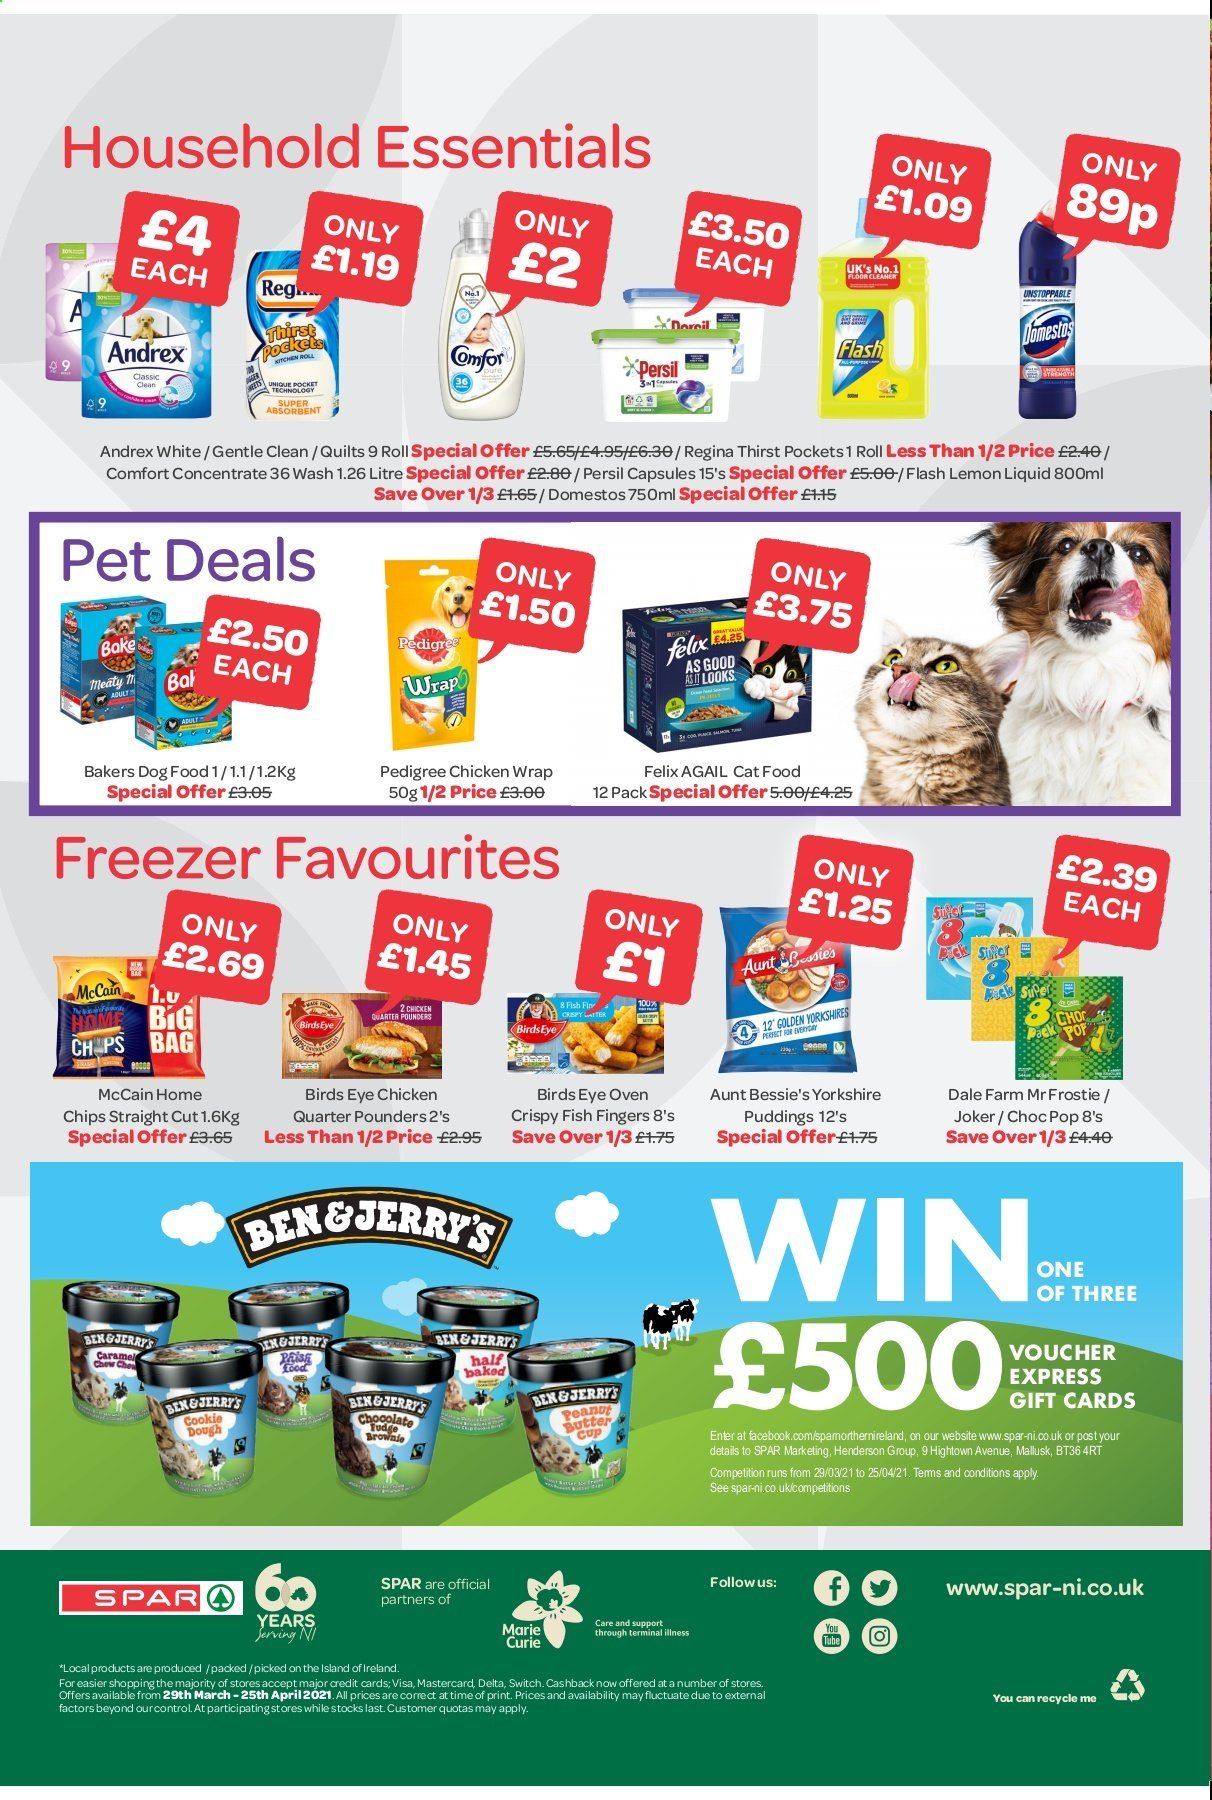 thumbnail - SPAR offer  - 29/03/2021 - 25/04/2021 - Sales products - Aunt Bessie's, fish fingers, fish, fish sticks, Bird's Eye, McCain, cookie dough, chips, caramel, Domestos, cleaner, floor cleaner, Persil, Comfort softener, cup, animal food, cat food, dog food, Pedigree, Bakers. Page 6.